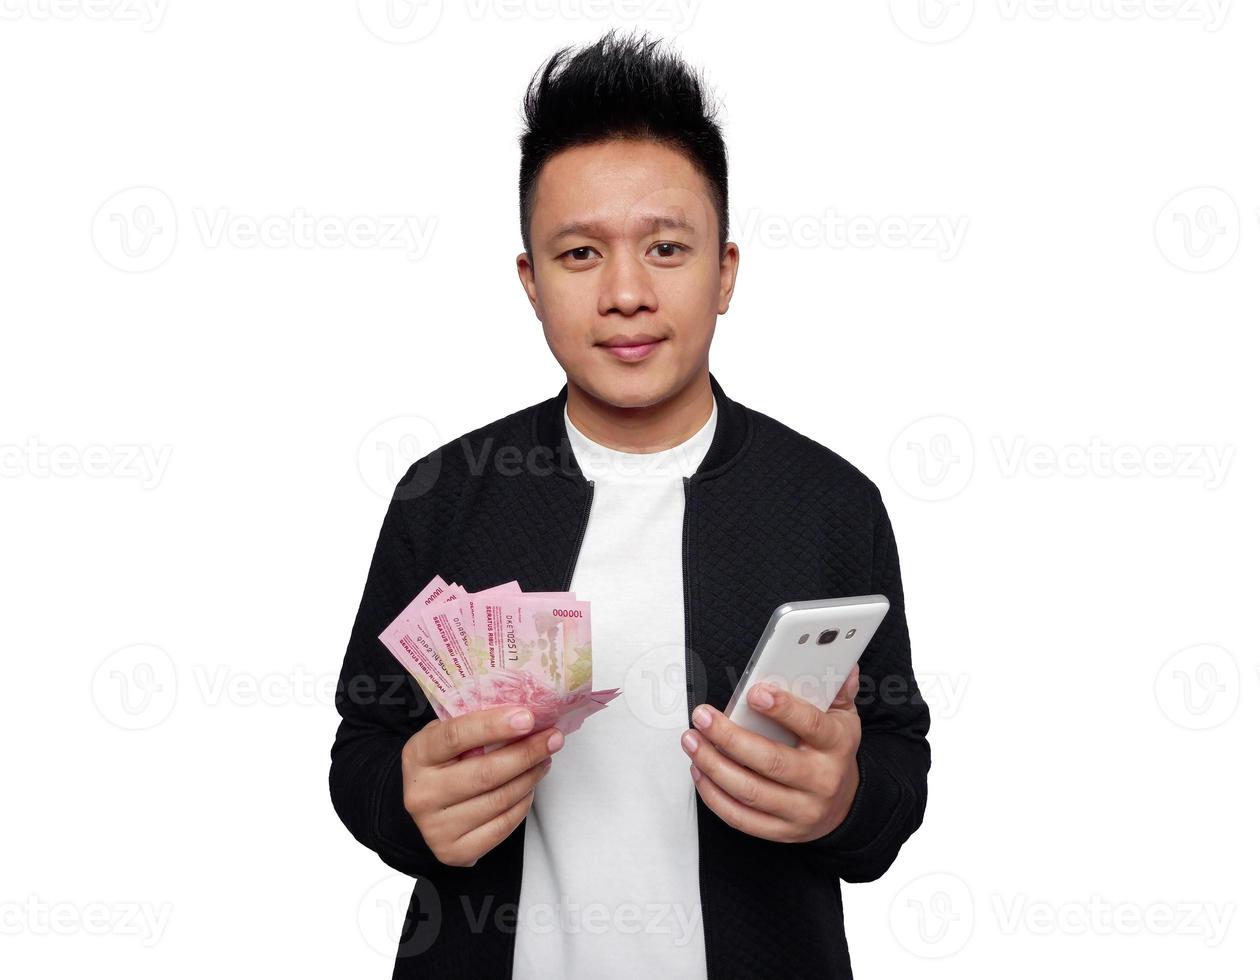 Handsome man holding smartphone and holding indonesian money smiling looking at camera photo